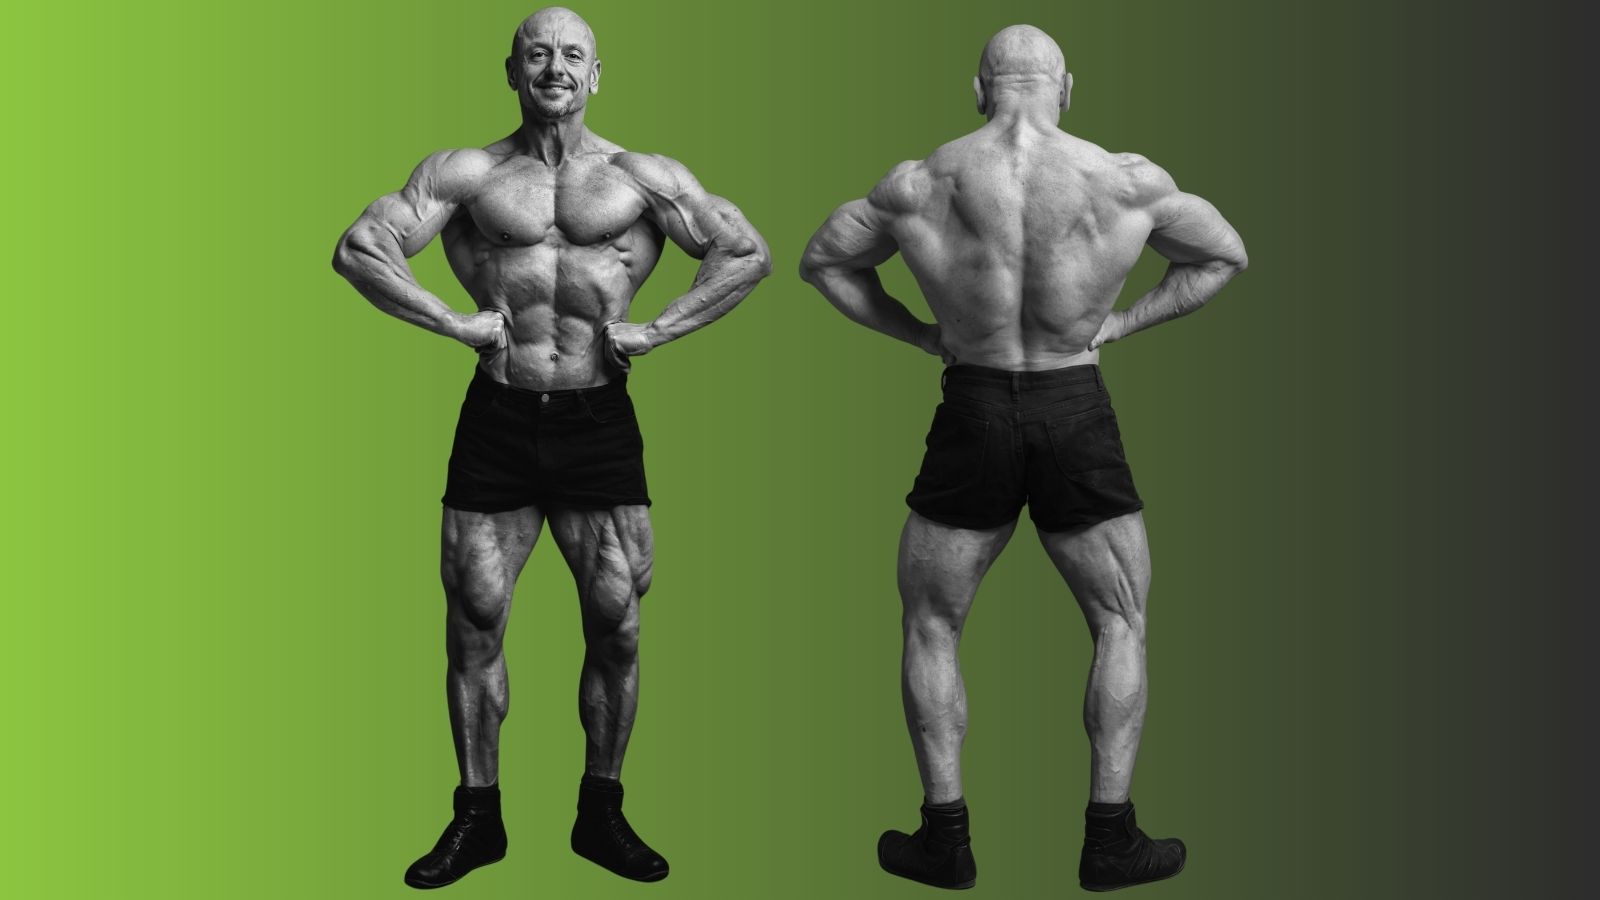 7 Basic Bodybuilding Poses All Bodybuilders Should Know